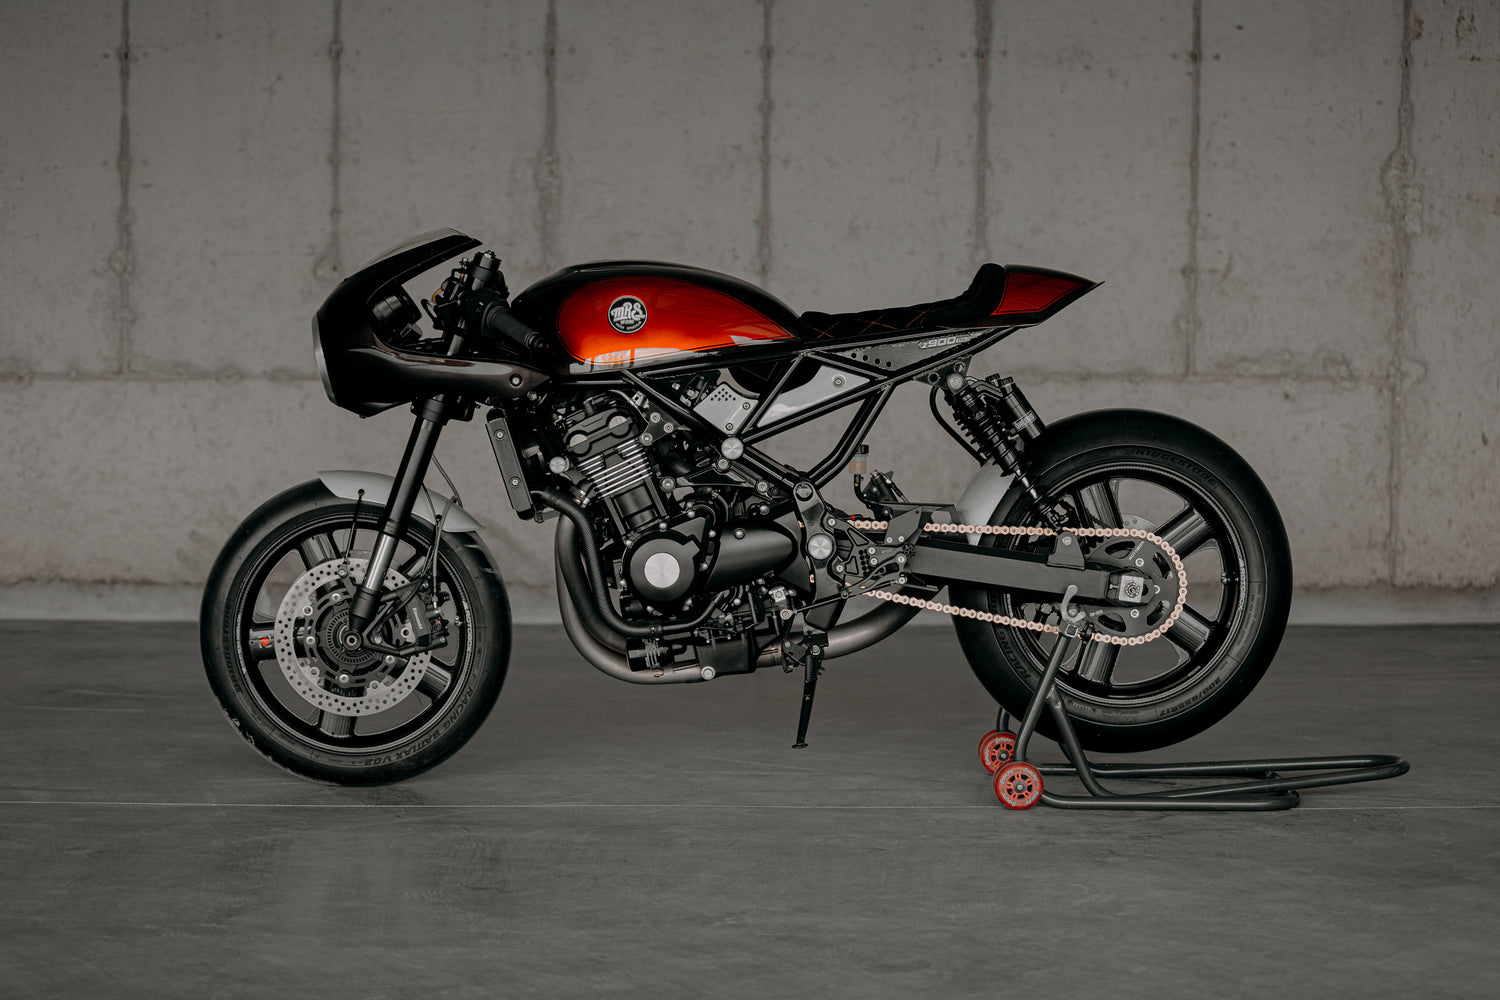 Interview with motorcycle builder MRS Oficina and Kawasaki z900RS bike.